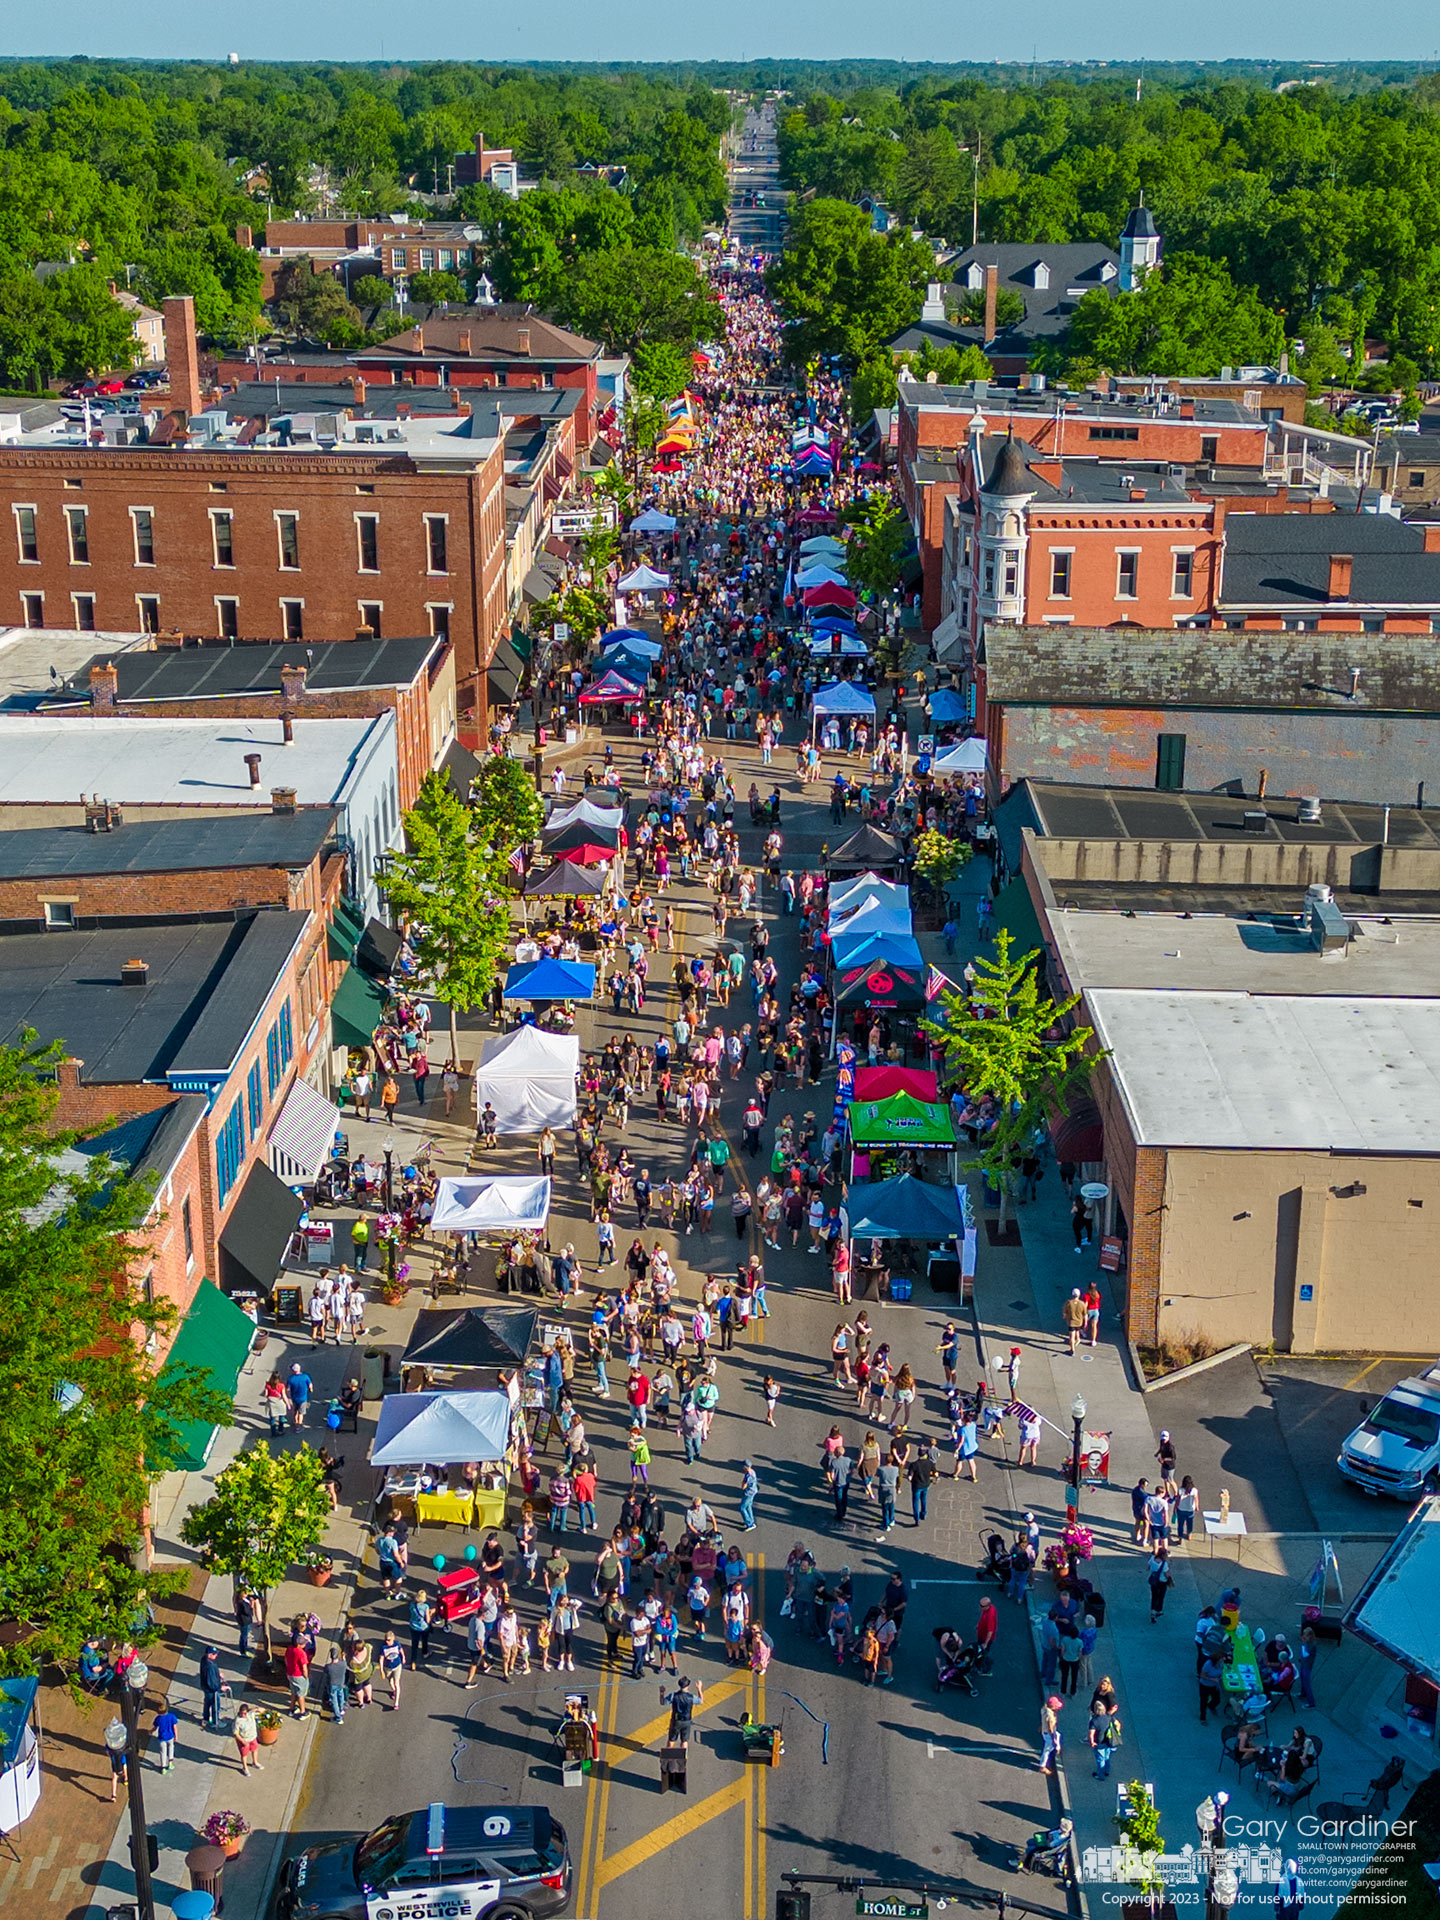 A large crowd, taking advantage of a warm and breezy spring day, fills State Street in Uptown Westerville for the first Fourth Friday event of the year. My Final Photo for May 26, 2023.